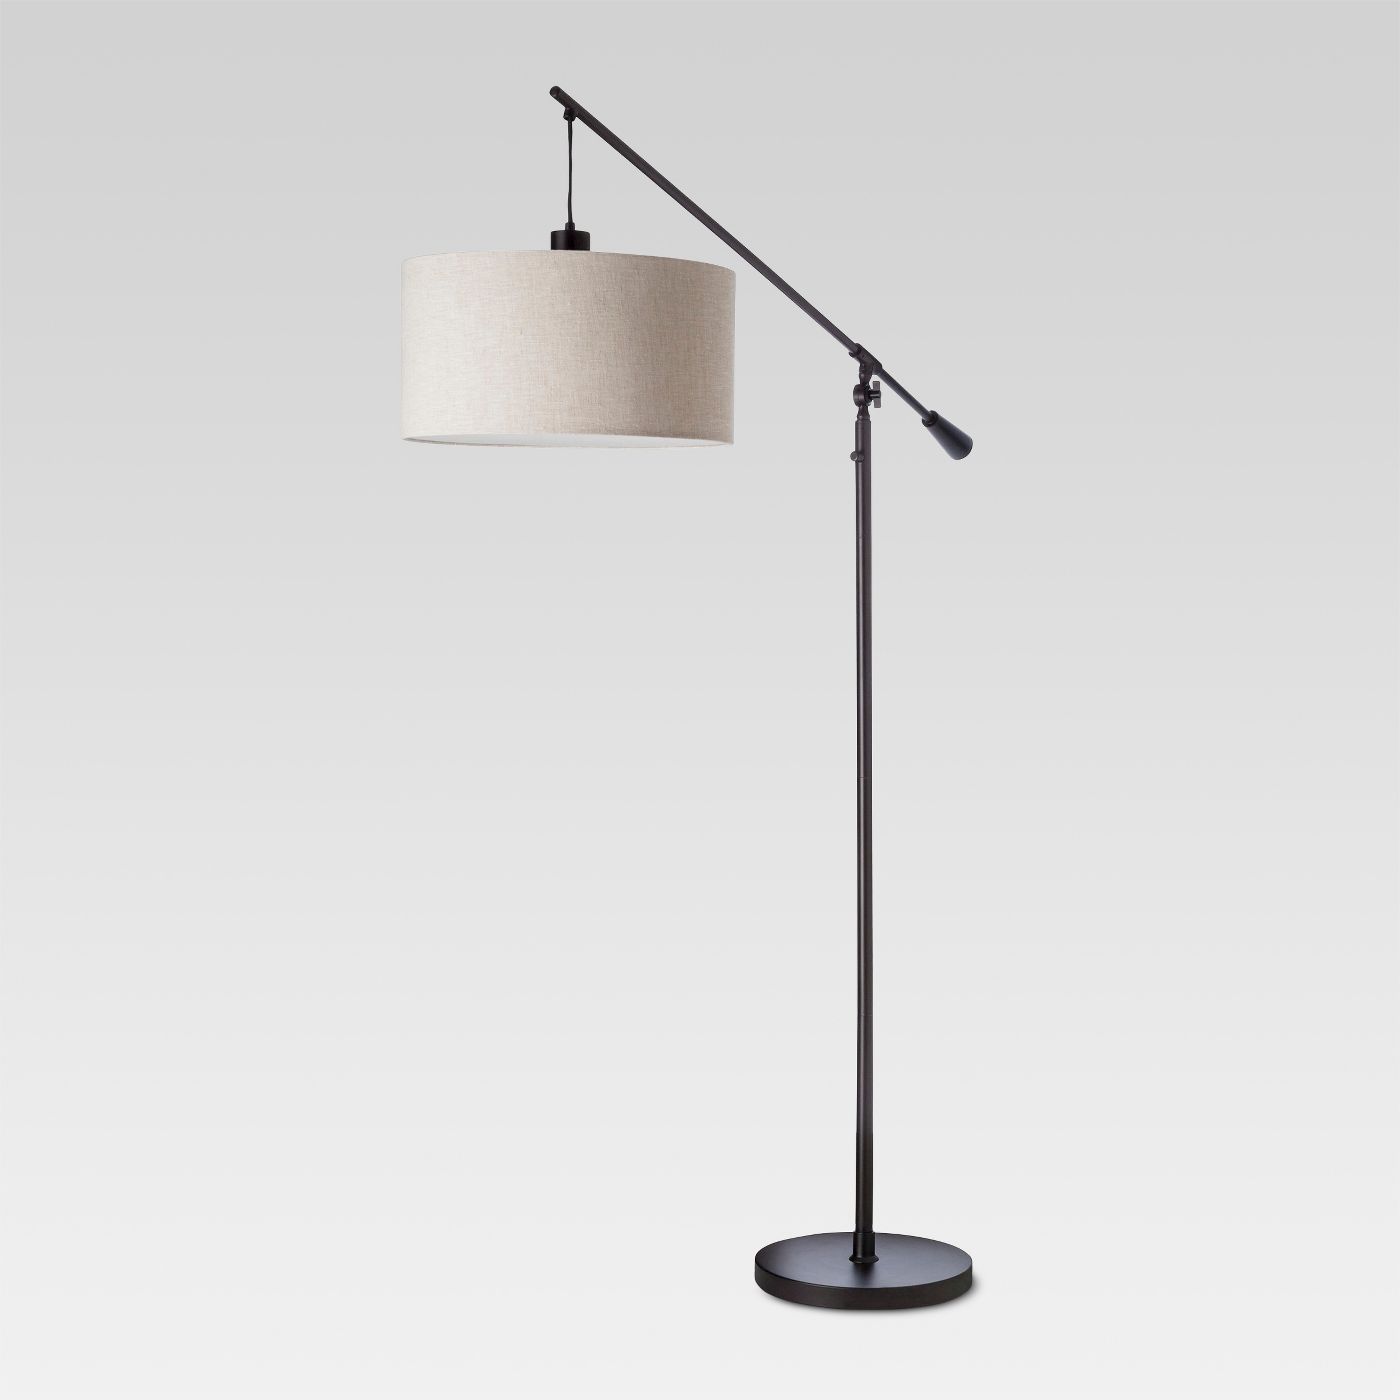 Cantilever Drop Pendant Floor Lamp Antique Brown - Threshold™ - image 1 of 11